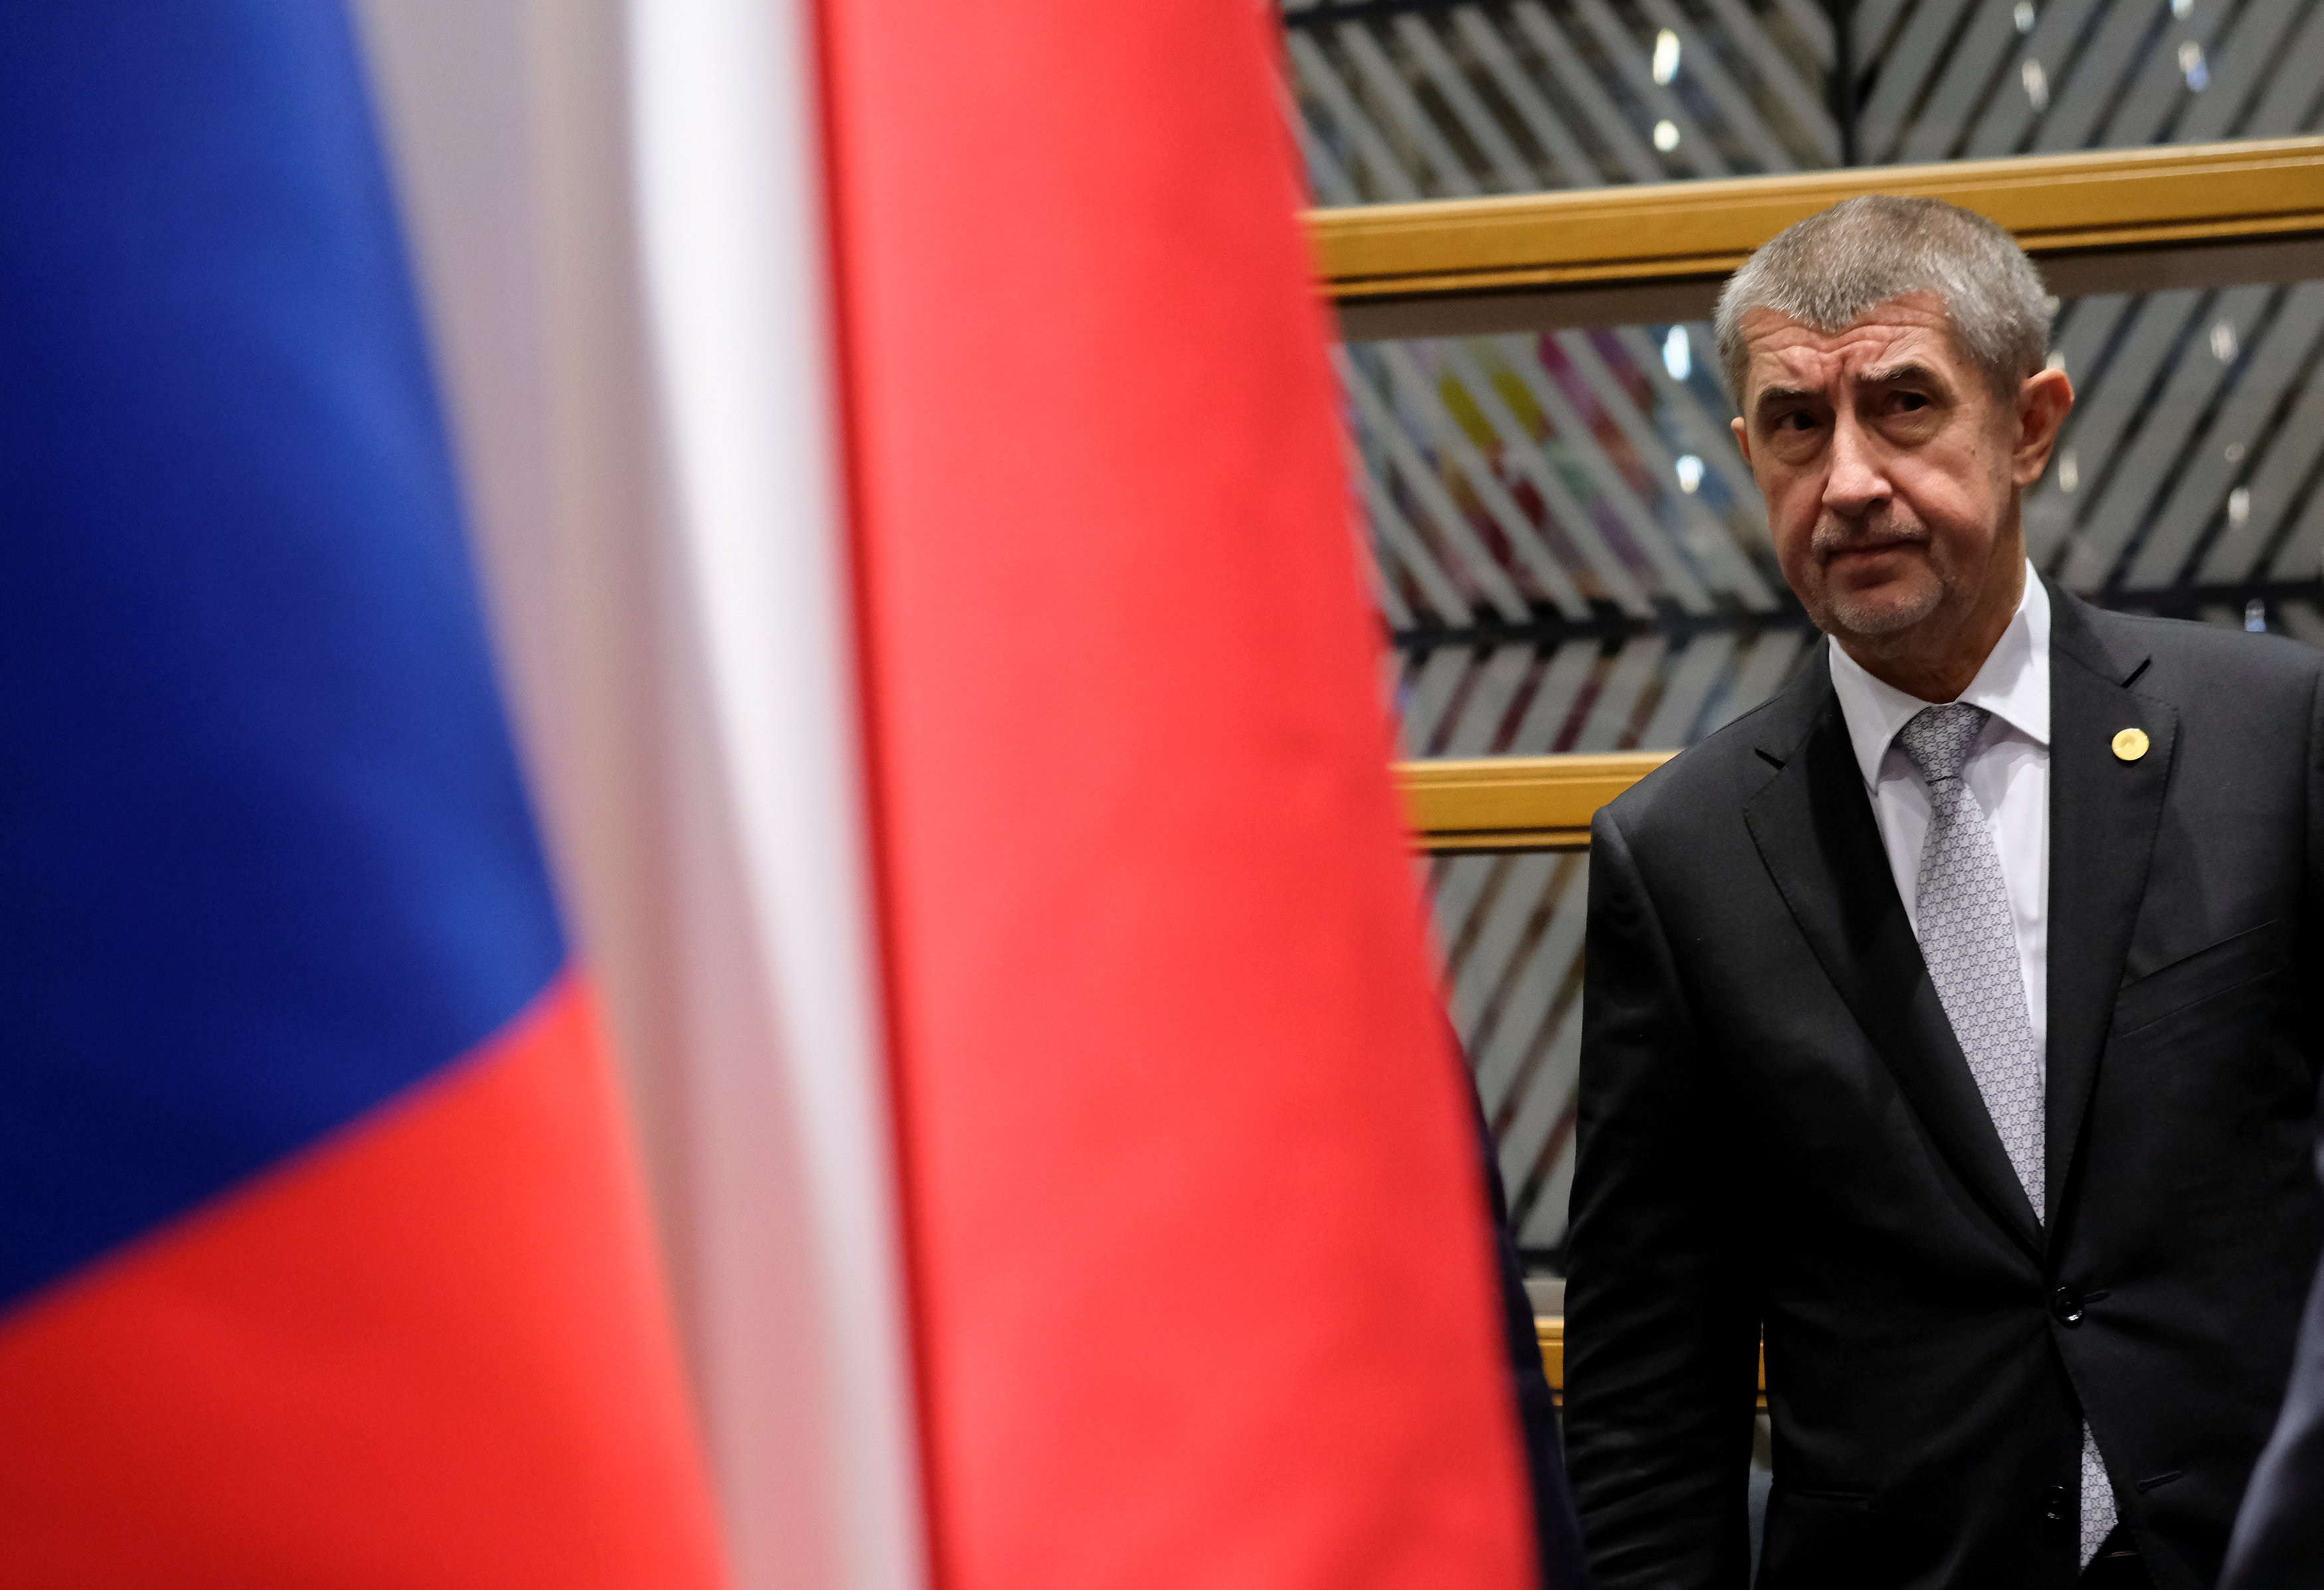 The Czech prime minister, Andrej Babiš, at the Visegrad Group meeting in Brussels, in December 14, 2017 (by Reuters/Olivier Hoslet)